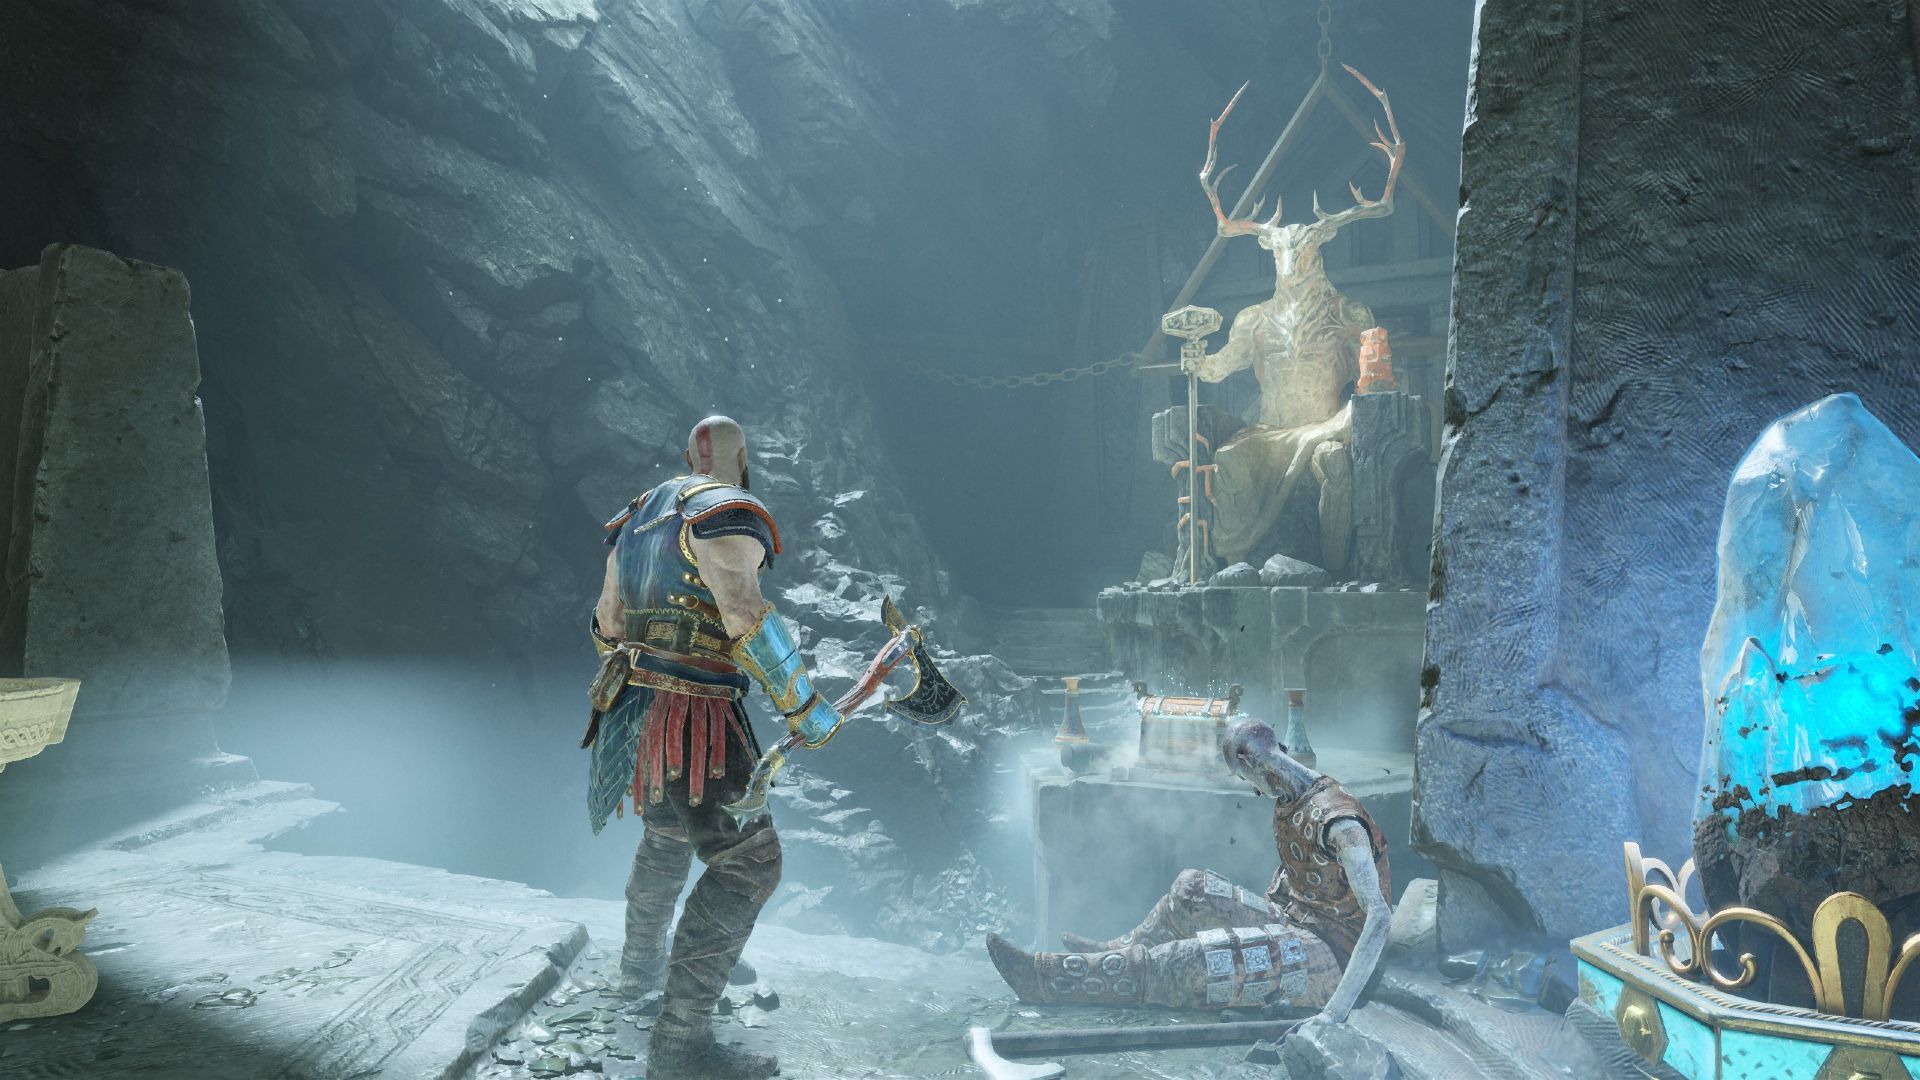 Can I play God of War (any part) on PC? - Quora